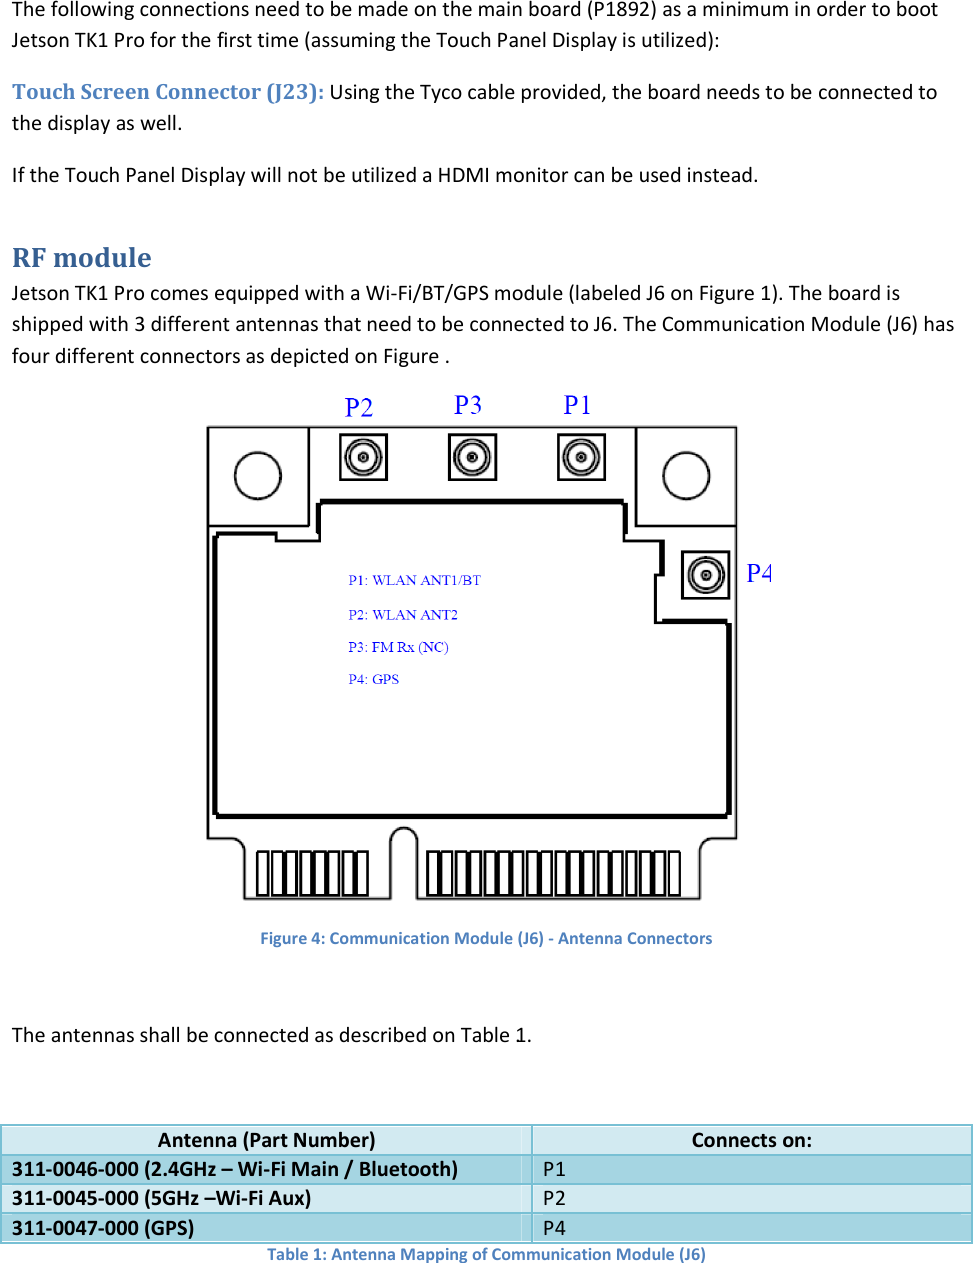 The following connections need to be made on the main board (P1892) as a minimum in order to boot Jetson TK1 Pro for the first time (assuming the Touch Panel Display is utilized): Touch Screen Connector (J23): Using the Tyco cable provided, the board needs to be connected to the display as well.  If the Touch Panel Display will not be utilized a HDMI monitor can be used instead. RF module Jetson TK1 Pro comes equipped with a Wi-Fi/BT/GPS module (labeled J6 on Figure 1). The board is shipped with 3 different antennas that need to be connected to J6. The Communication Module (J6) has four different connectors as depicted on Figure .   Figure 4: Communication Module (J6) - Antenna Connectors   .  Antenna (Part Number) Connects on: 311-0046-000 (2.4GHz – Wi-Fi Main / Bluetooth) P1 311-0045-000 (5GHz –Wi-Fi Aux) P2 311-0047-000 (GPS) P4 Table 1: Antenna Mapping of Communication Module (J6) The antennas shall be connected as described on Table 1.